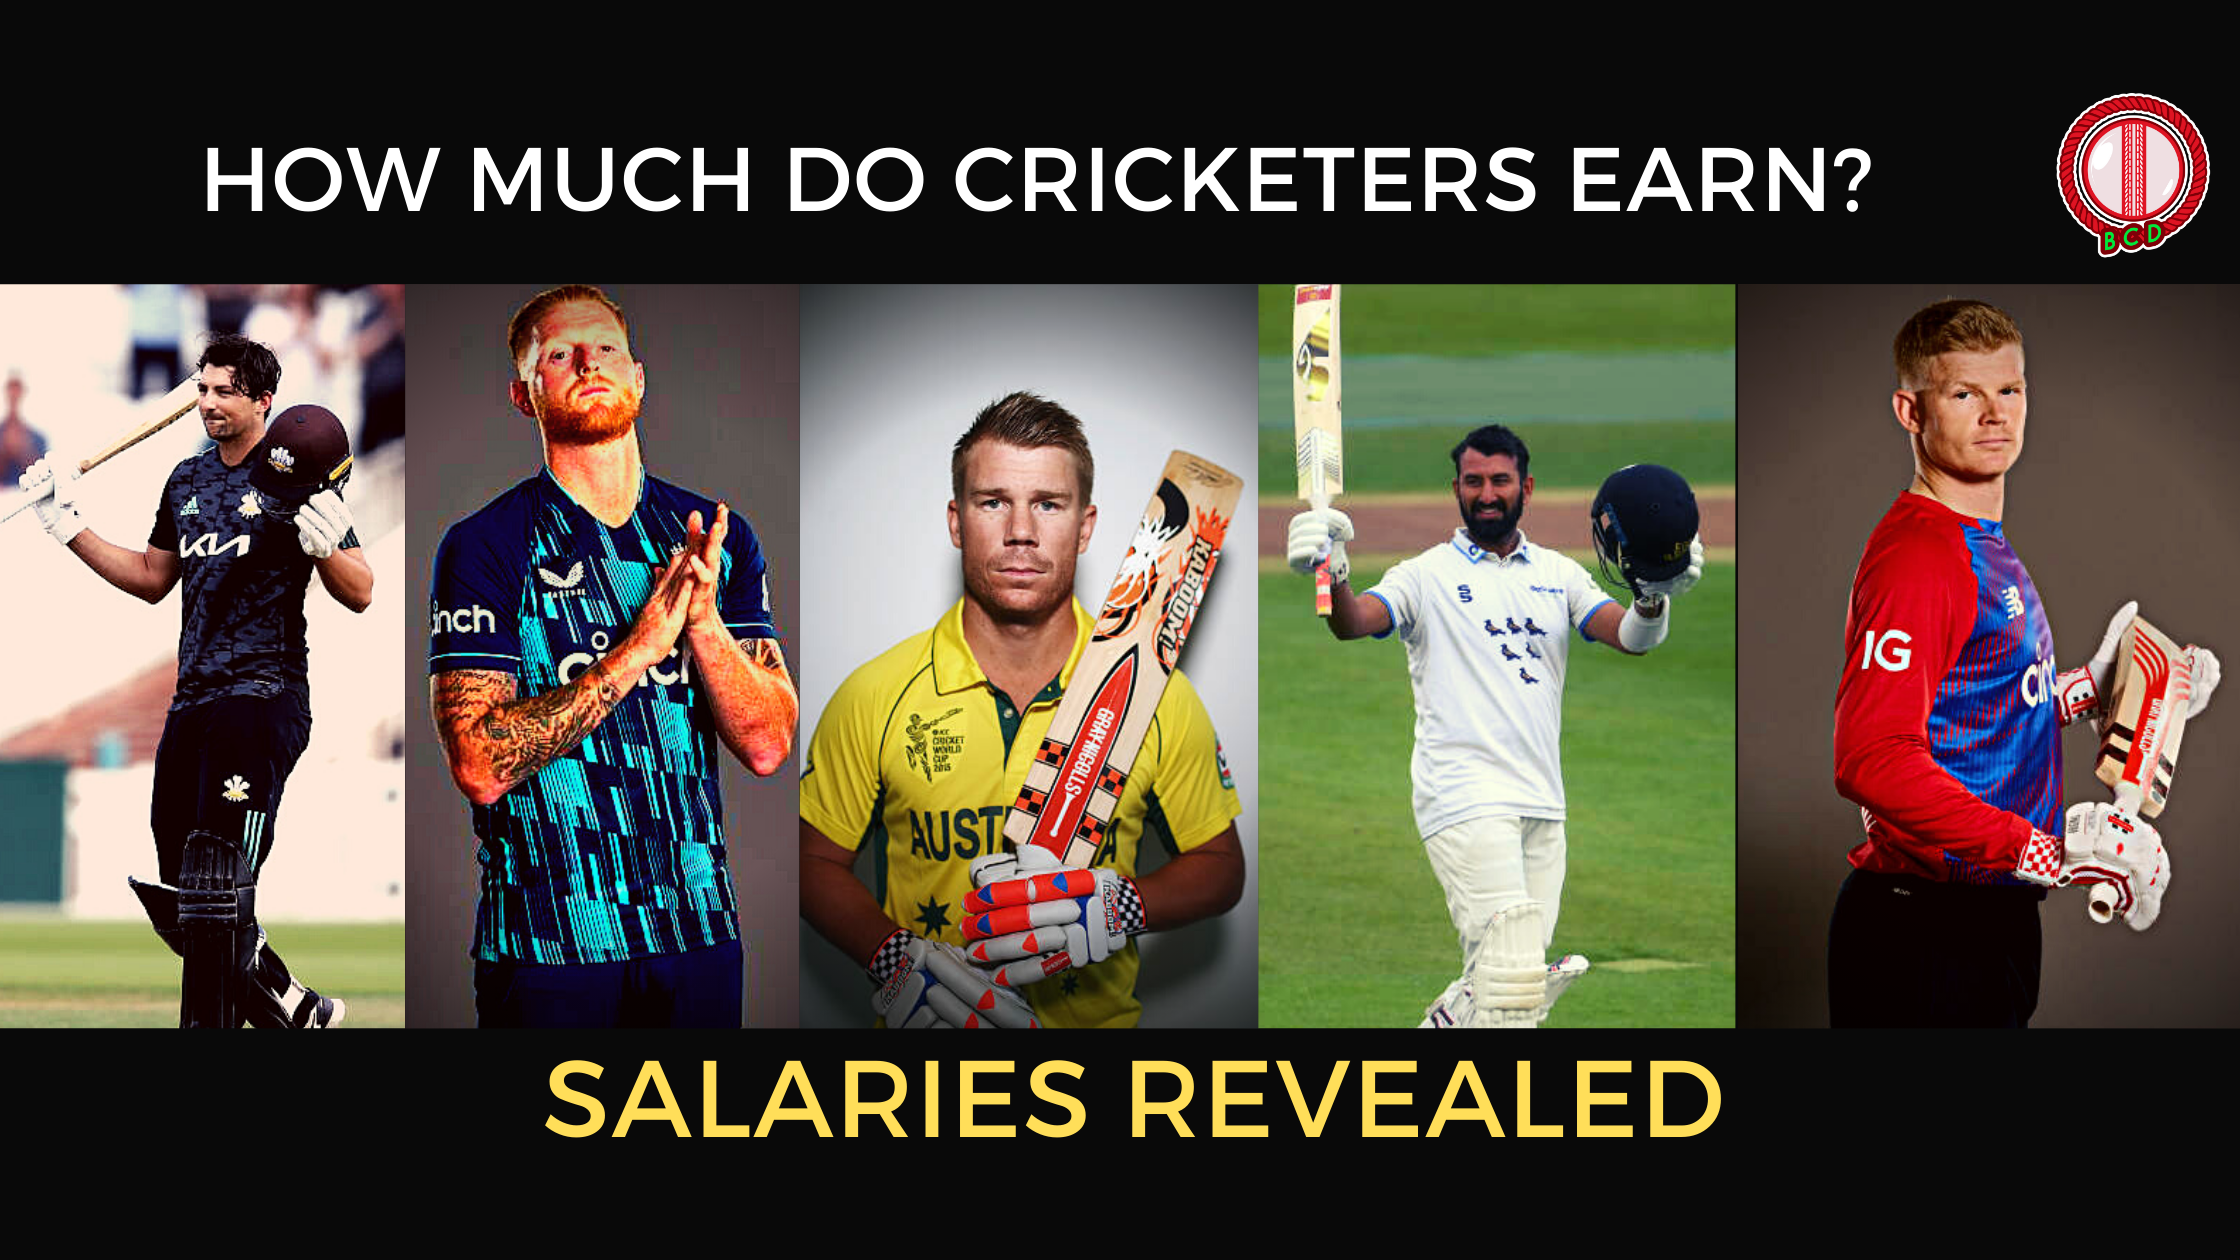 (from left to right) Photos of Tim David, Ben Stokes, David Warner, Cheteshwar Pujara, and Sam Billings with captions: How Much Do Cricketers Earn Per Year? Salaries Revealed.